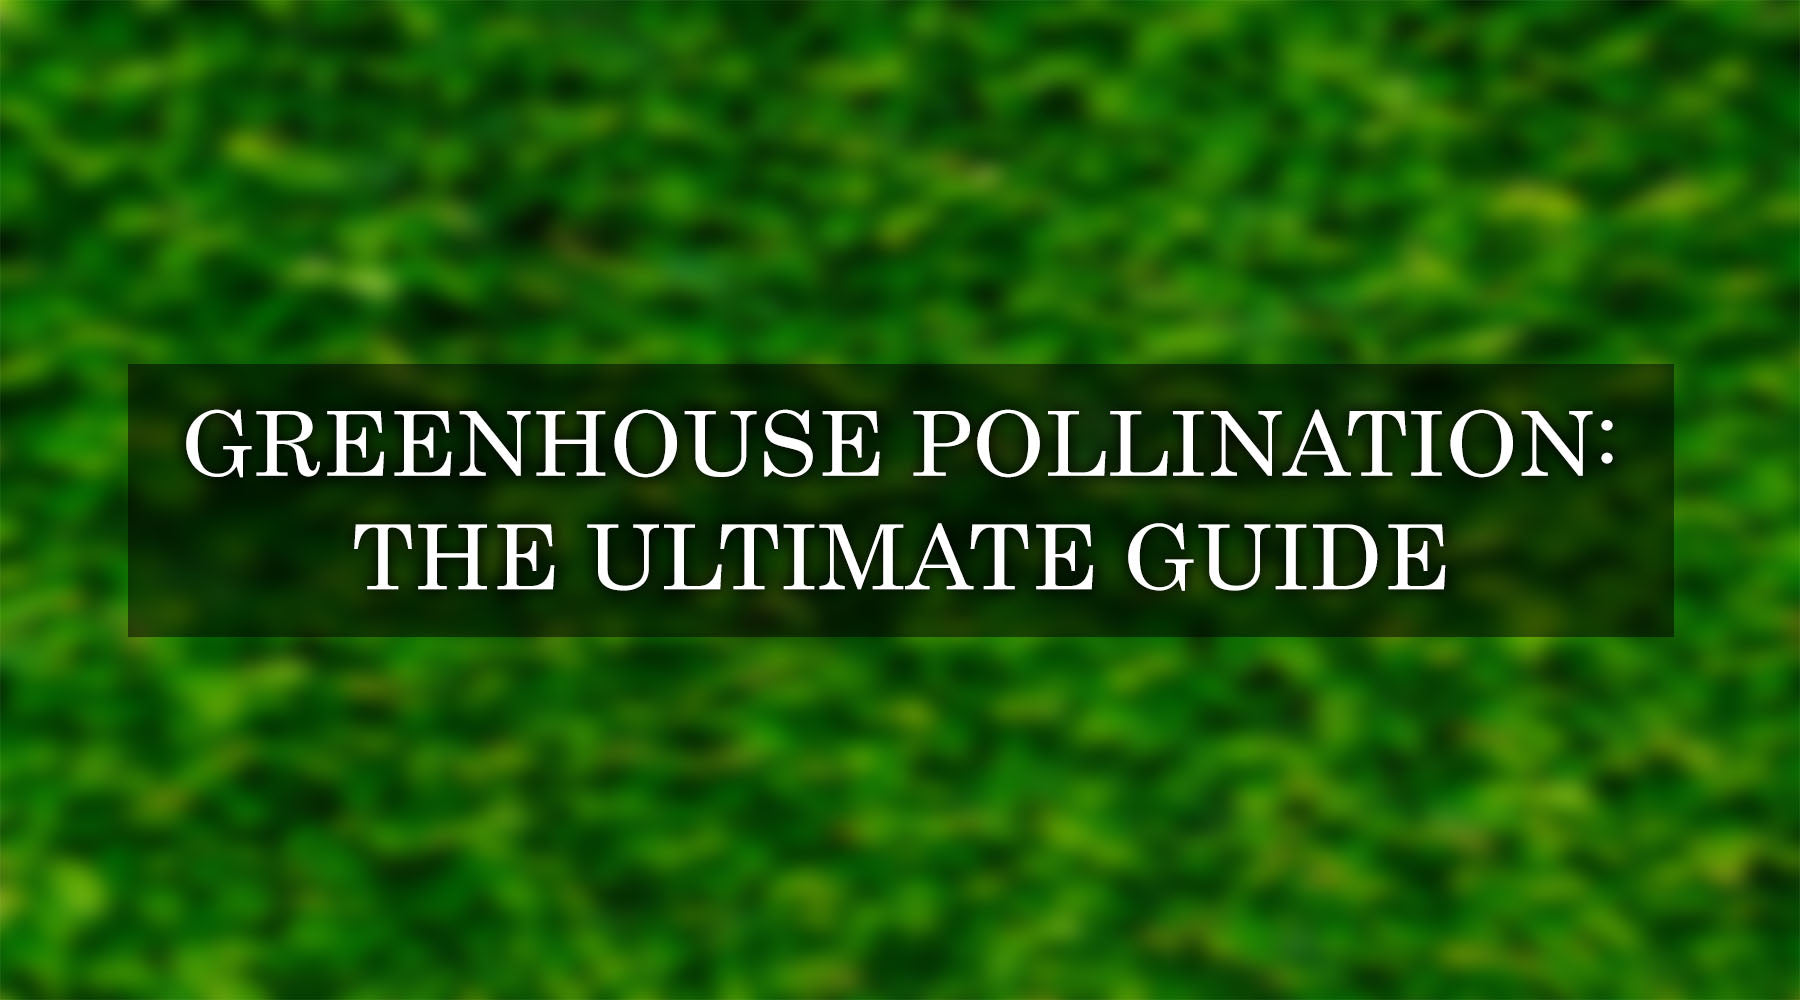 How to Pollinate in a Greenhouse: The Complete Guide to Greenhouse Pollination